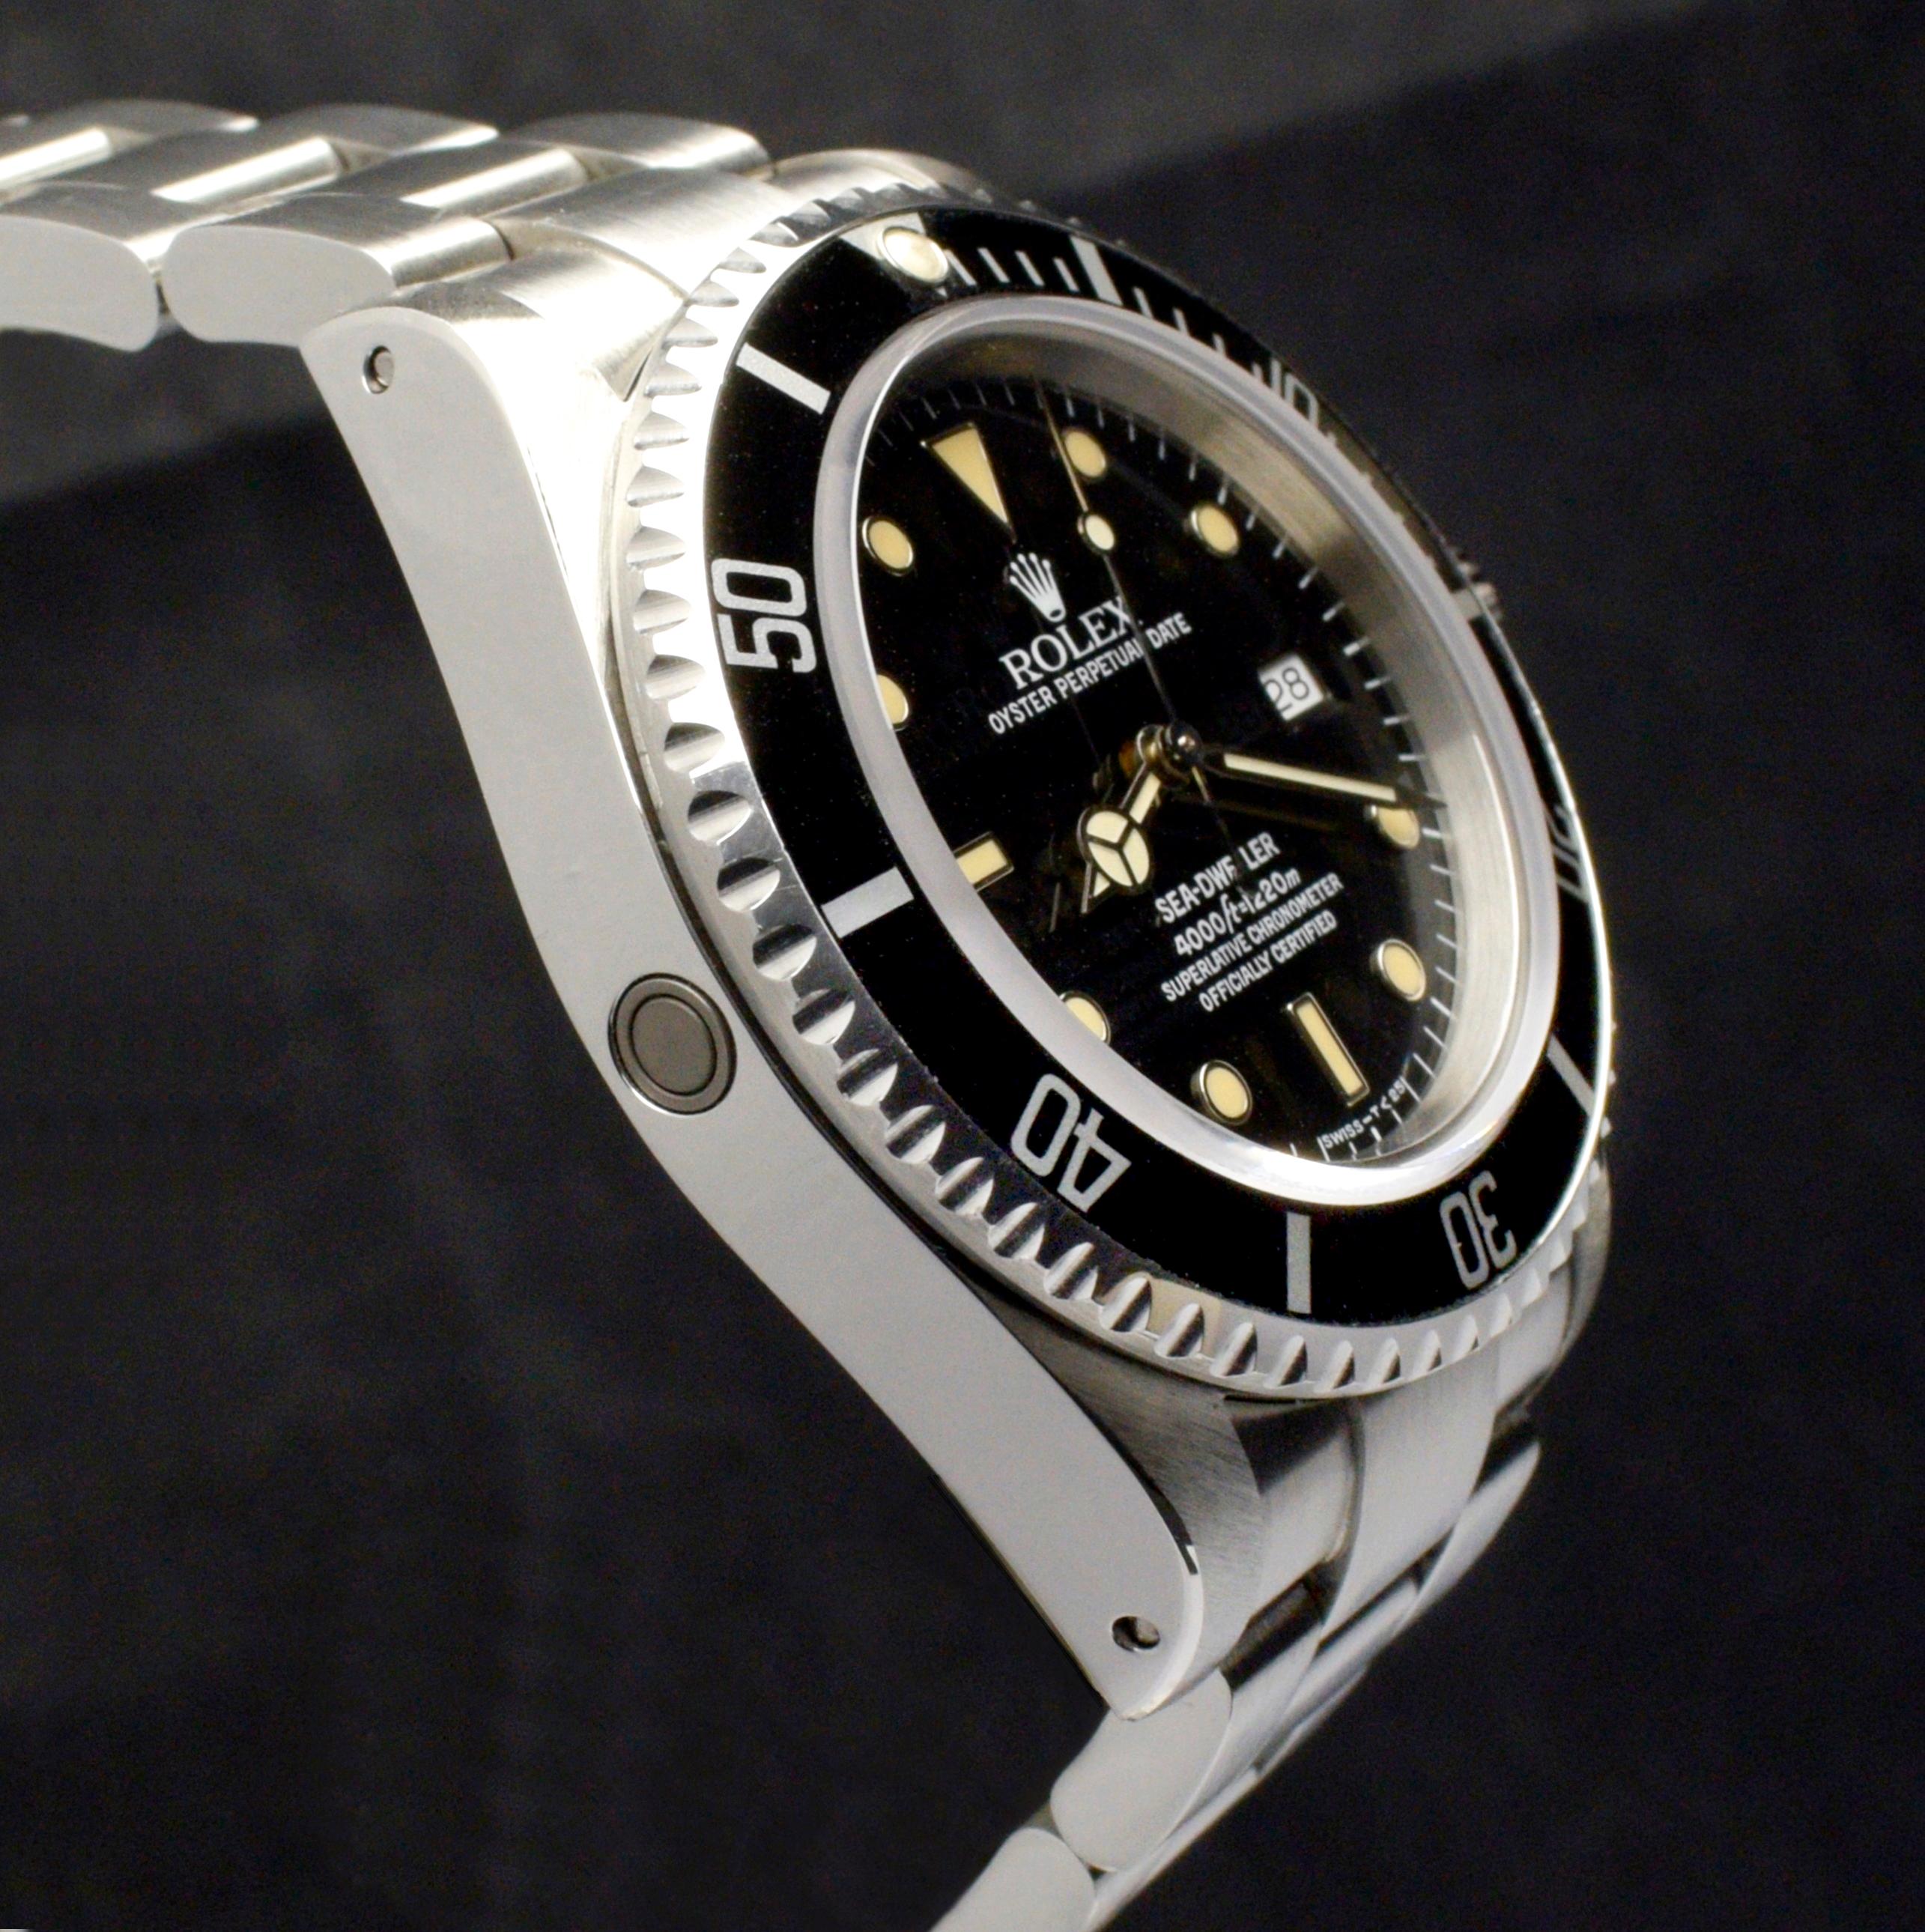 Rolex Sea-Dweller Submariner Creamy 16600 Steel Automatic Watch w/Paper, 1991 For Sale 1